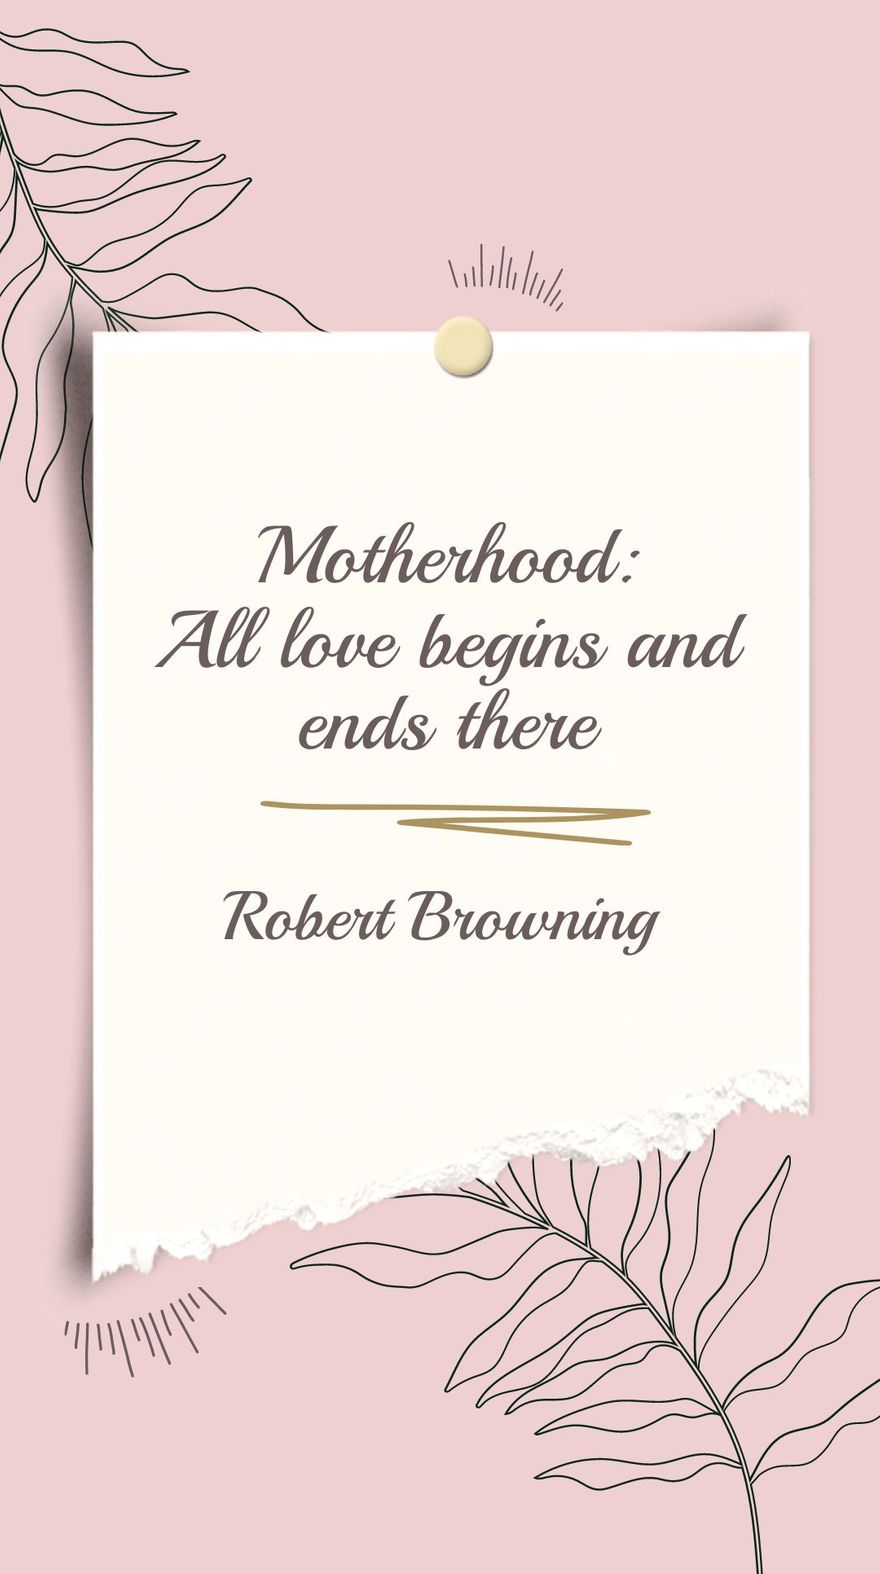 Robert Browning - Motherhood: All love begins and ends there.